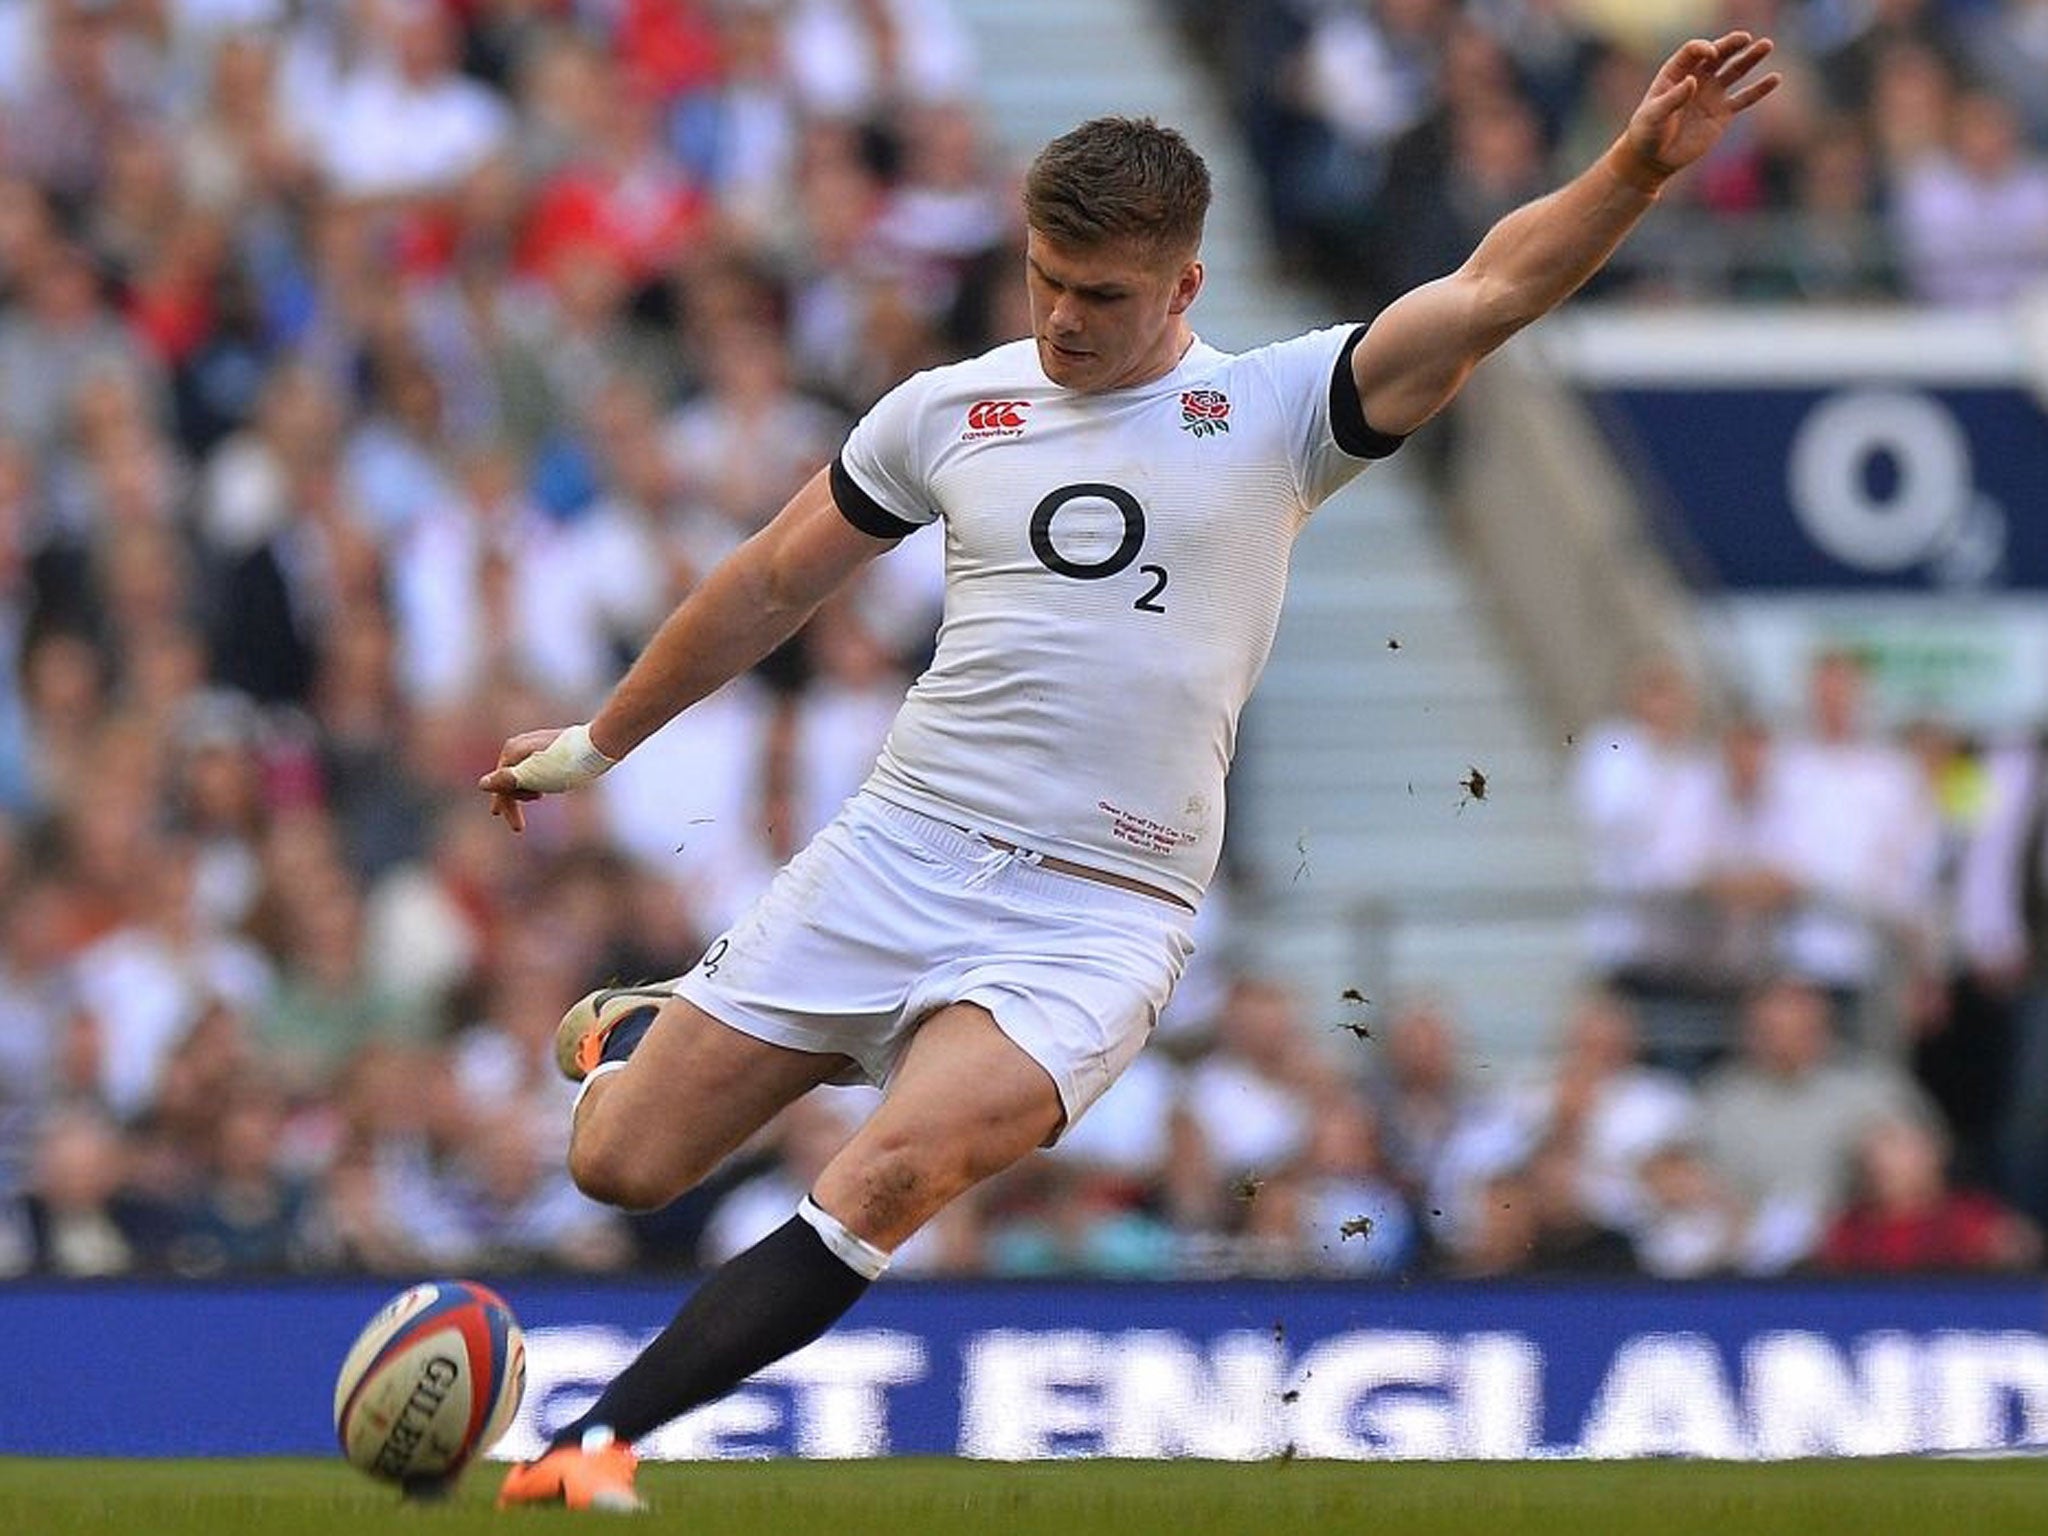 England fly-half Owen Farrell takes a penalty kick during the Six Nations International rugby Union match between England and Wales at Twickenham, West London (AFP)